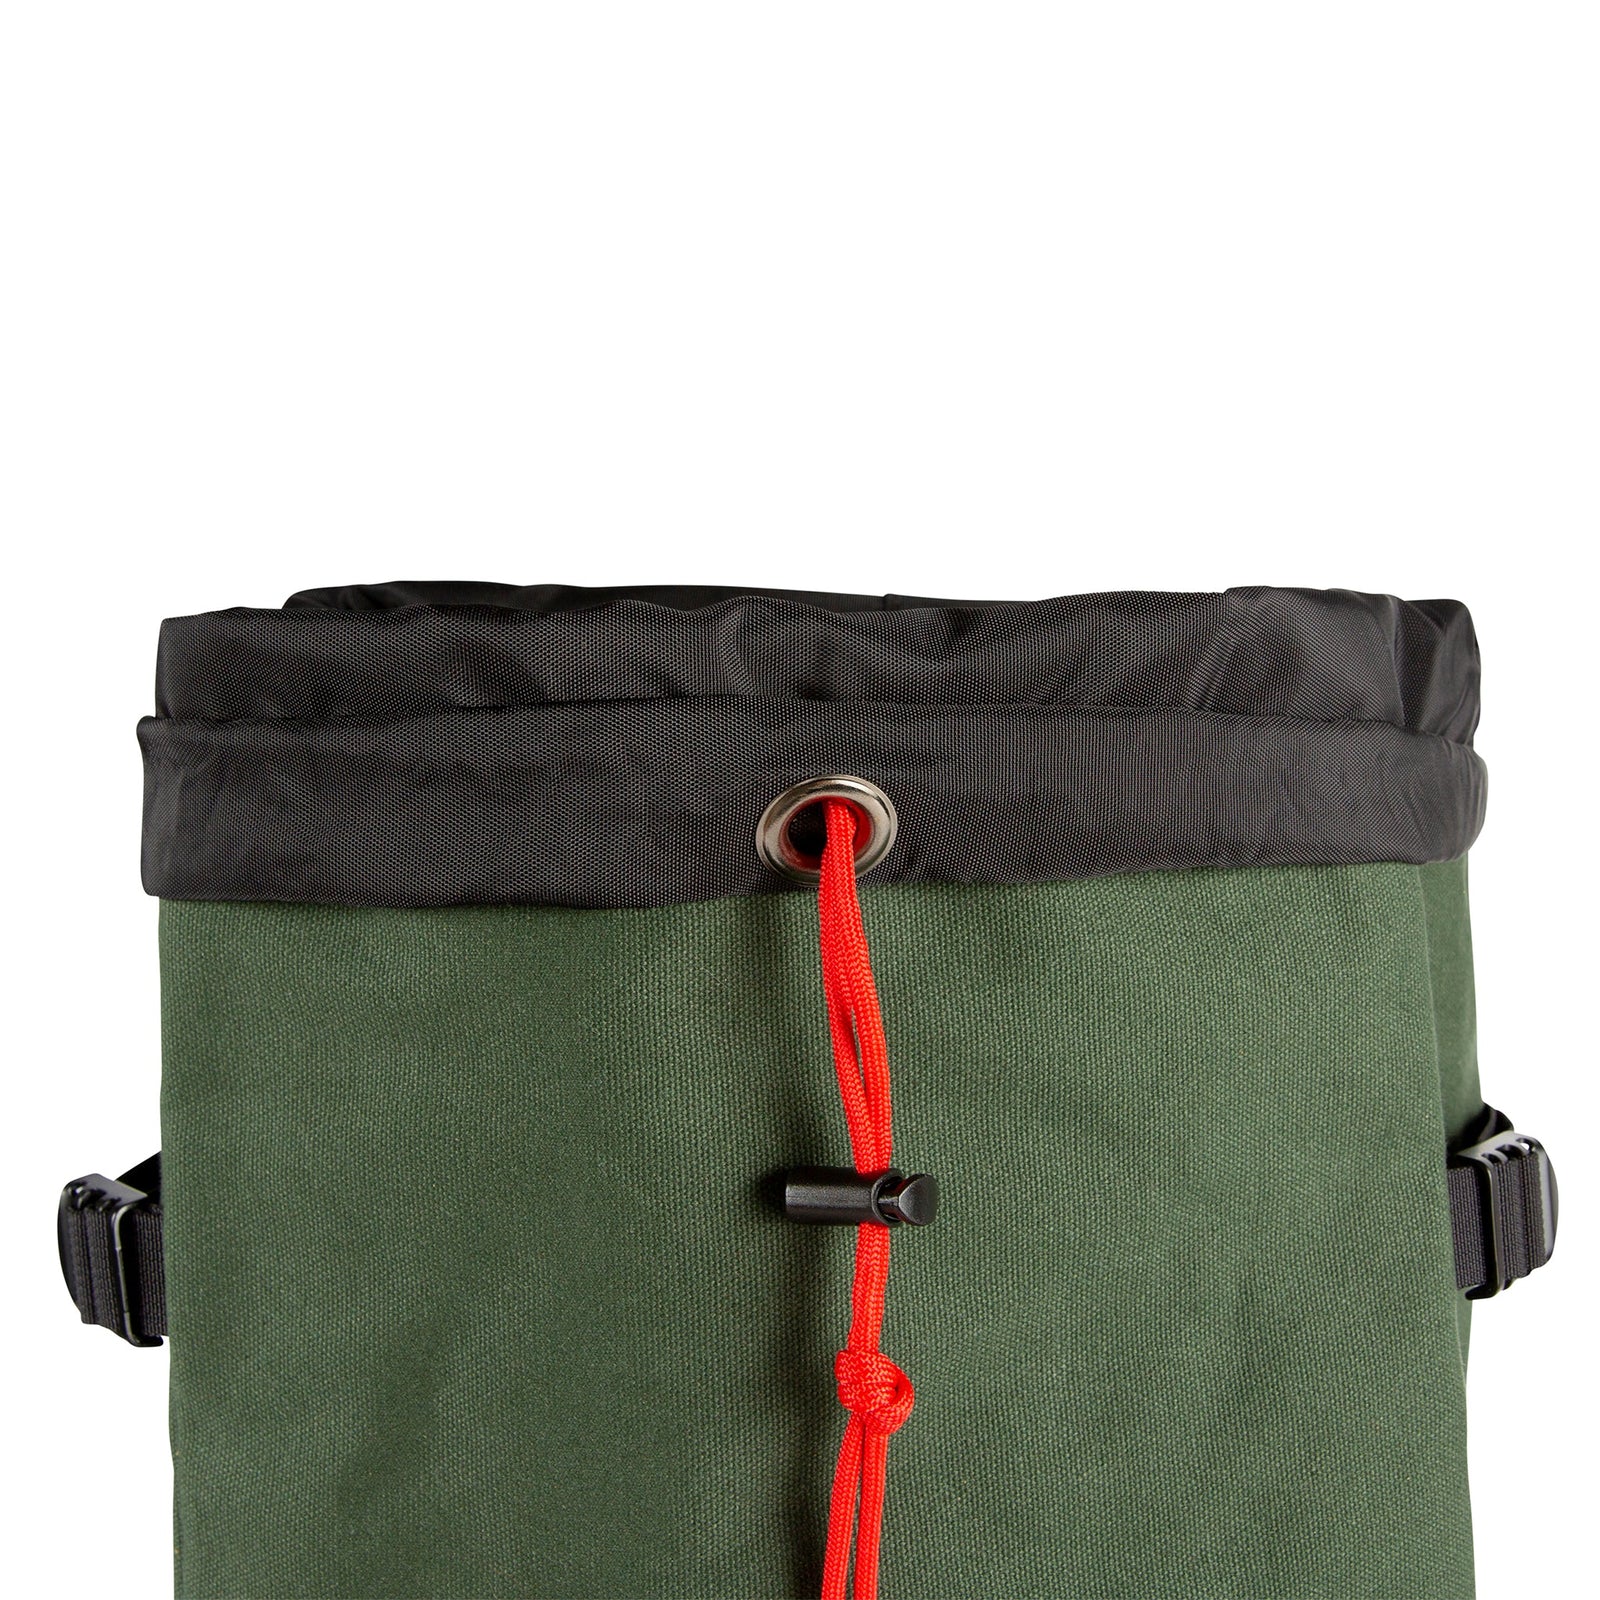 General close-up shot of Topo Designs Klettersack Heritage Canvas backpack in Olive green Canvas / Brown Leather showing red cinch cord on top closure.